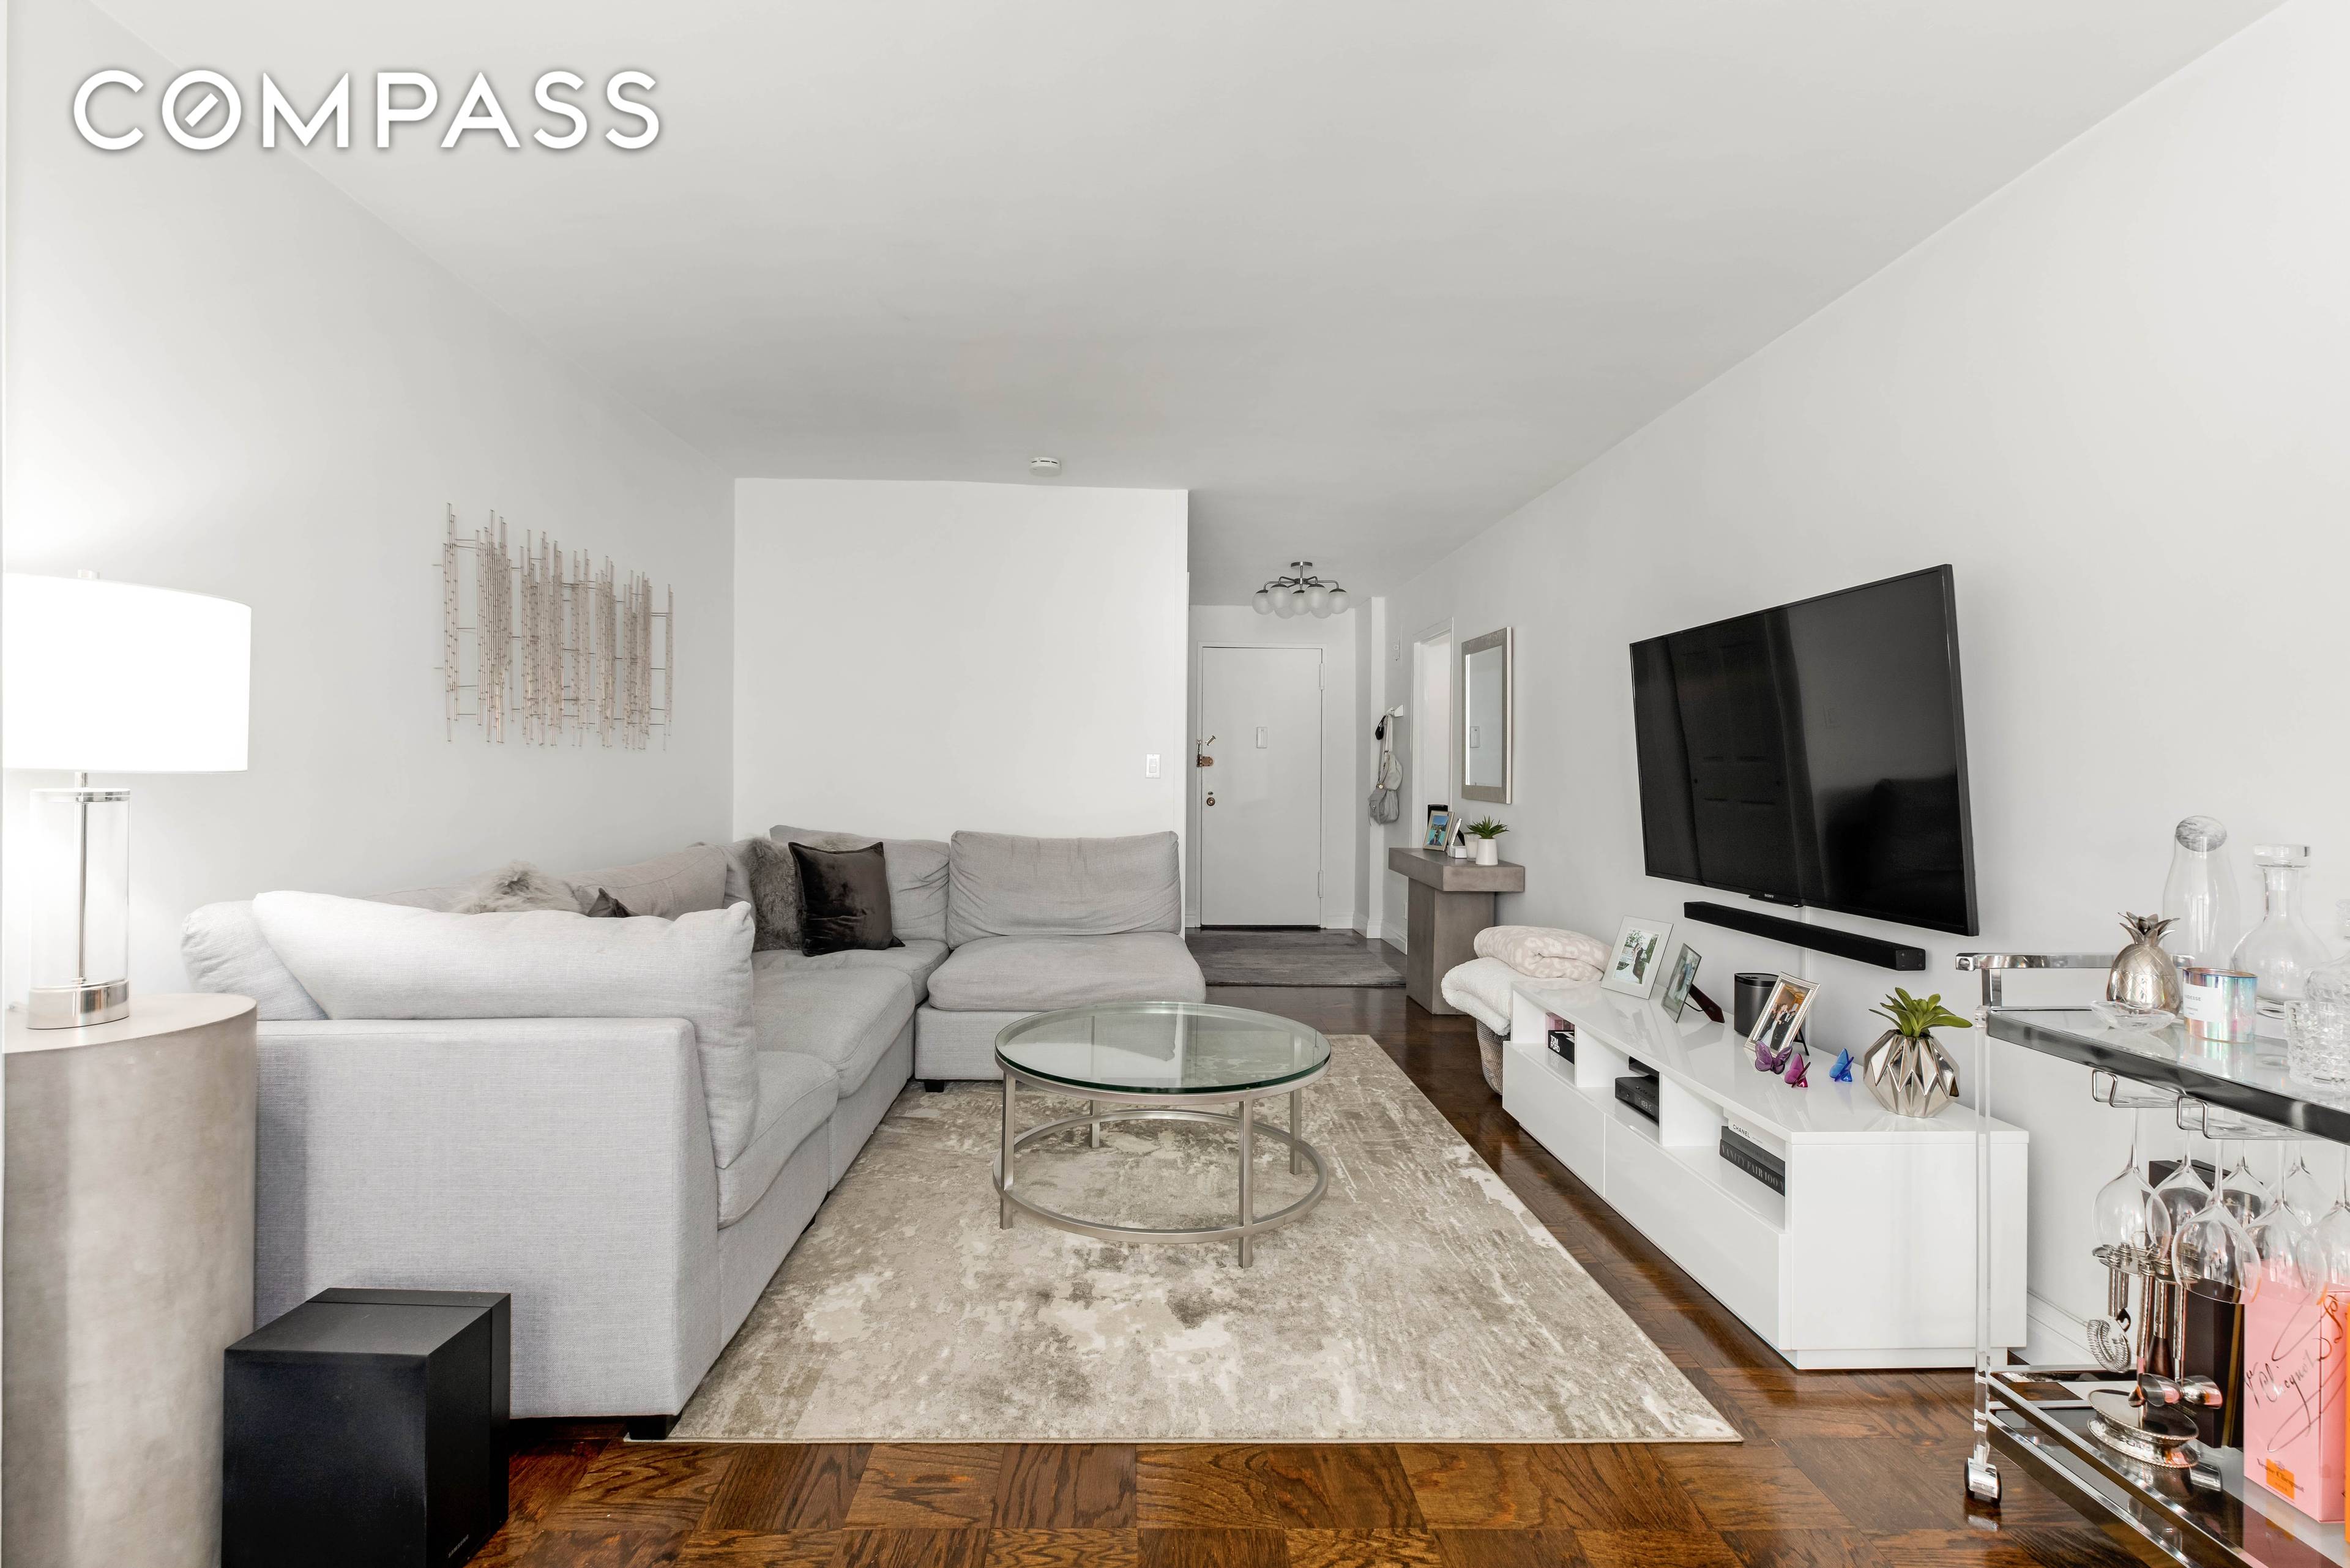 305 East 24th Street 24hr doorman Live in super Pet friendly Pieds a terre allowed with approval Sublet policy with approval After 1yr of ownership you may sublease for 2 ...